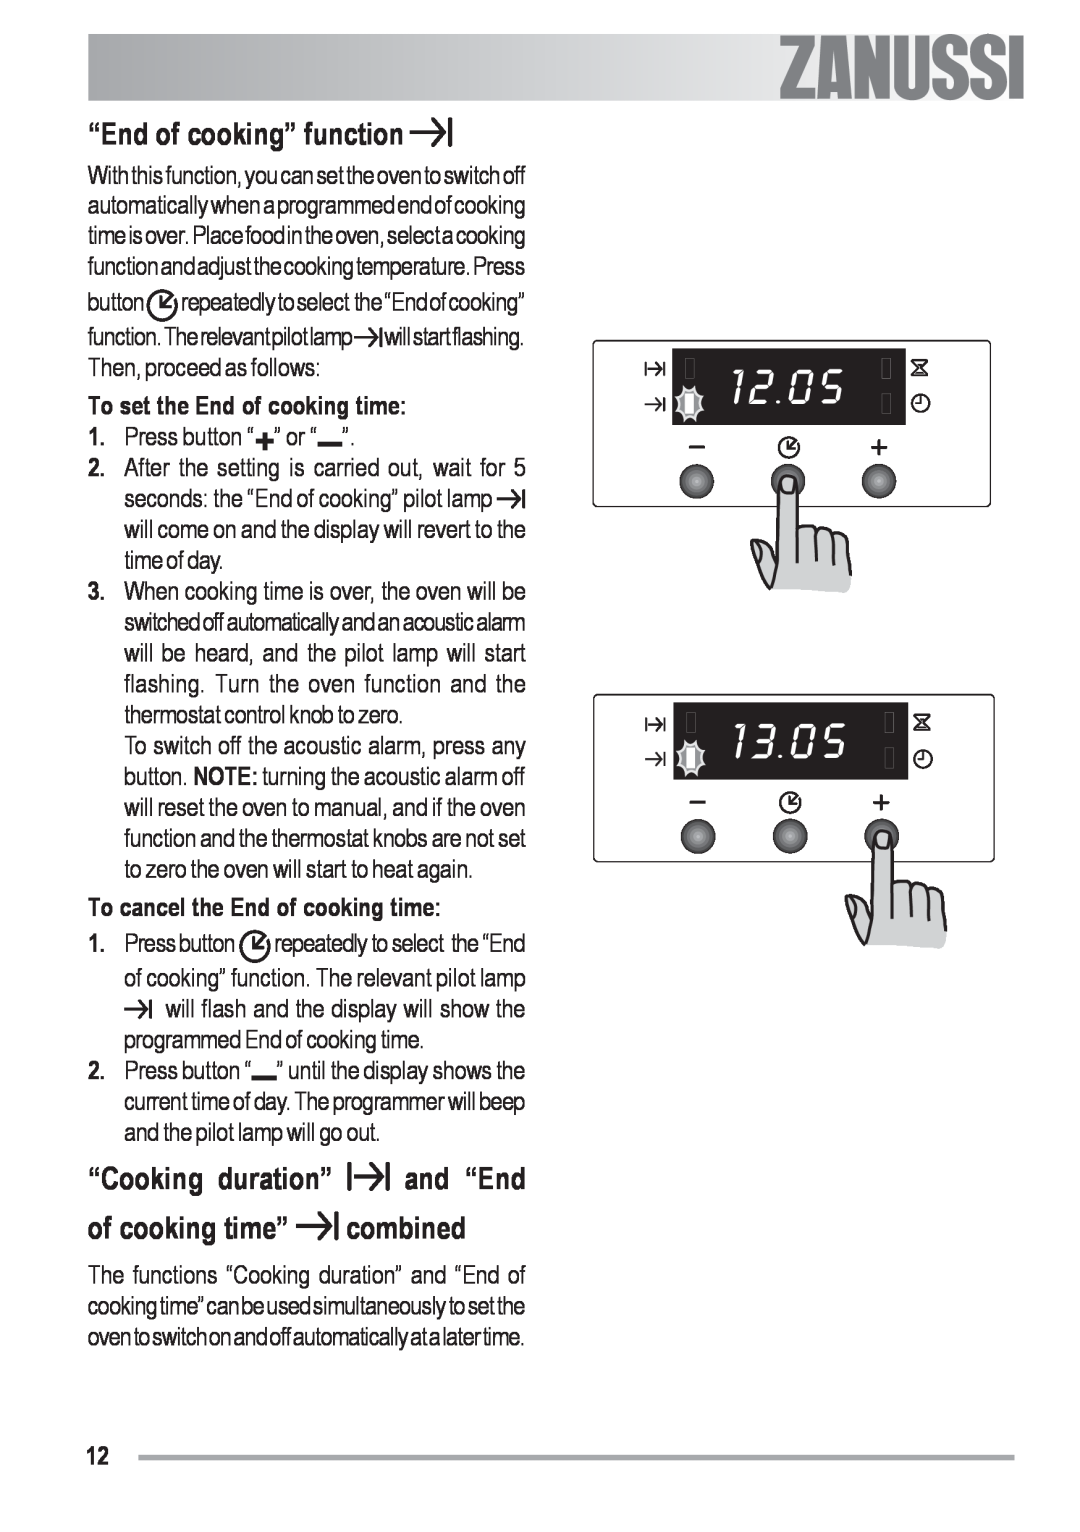 Zanussi ZOB 330 manual “End of cooking” function, “Cooking duration” and “End, of cooking time”combined, Press button 